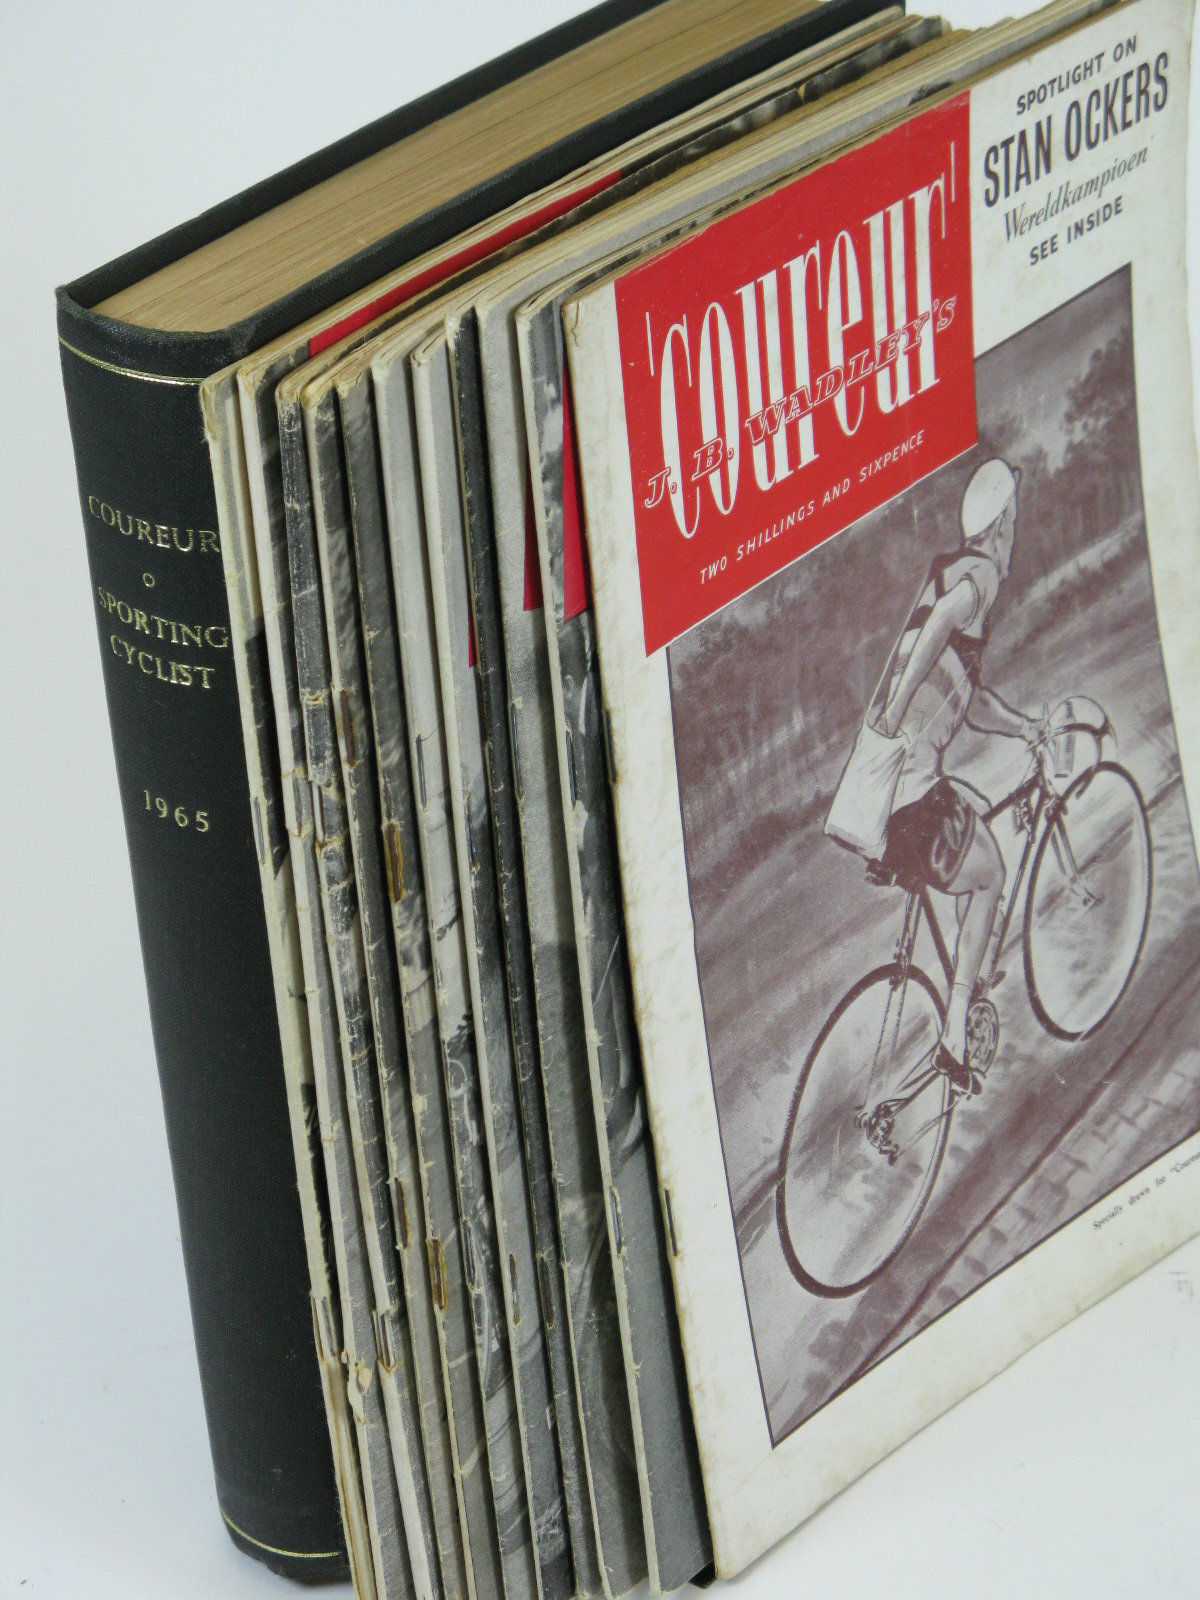 Coureur Sporting Cyclist Magazine ? Bound volume for 1965 and 11 random copies 1956-68.